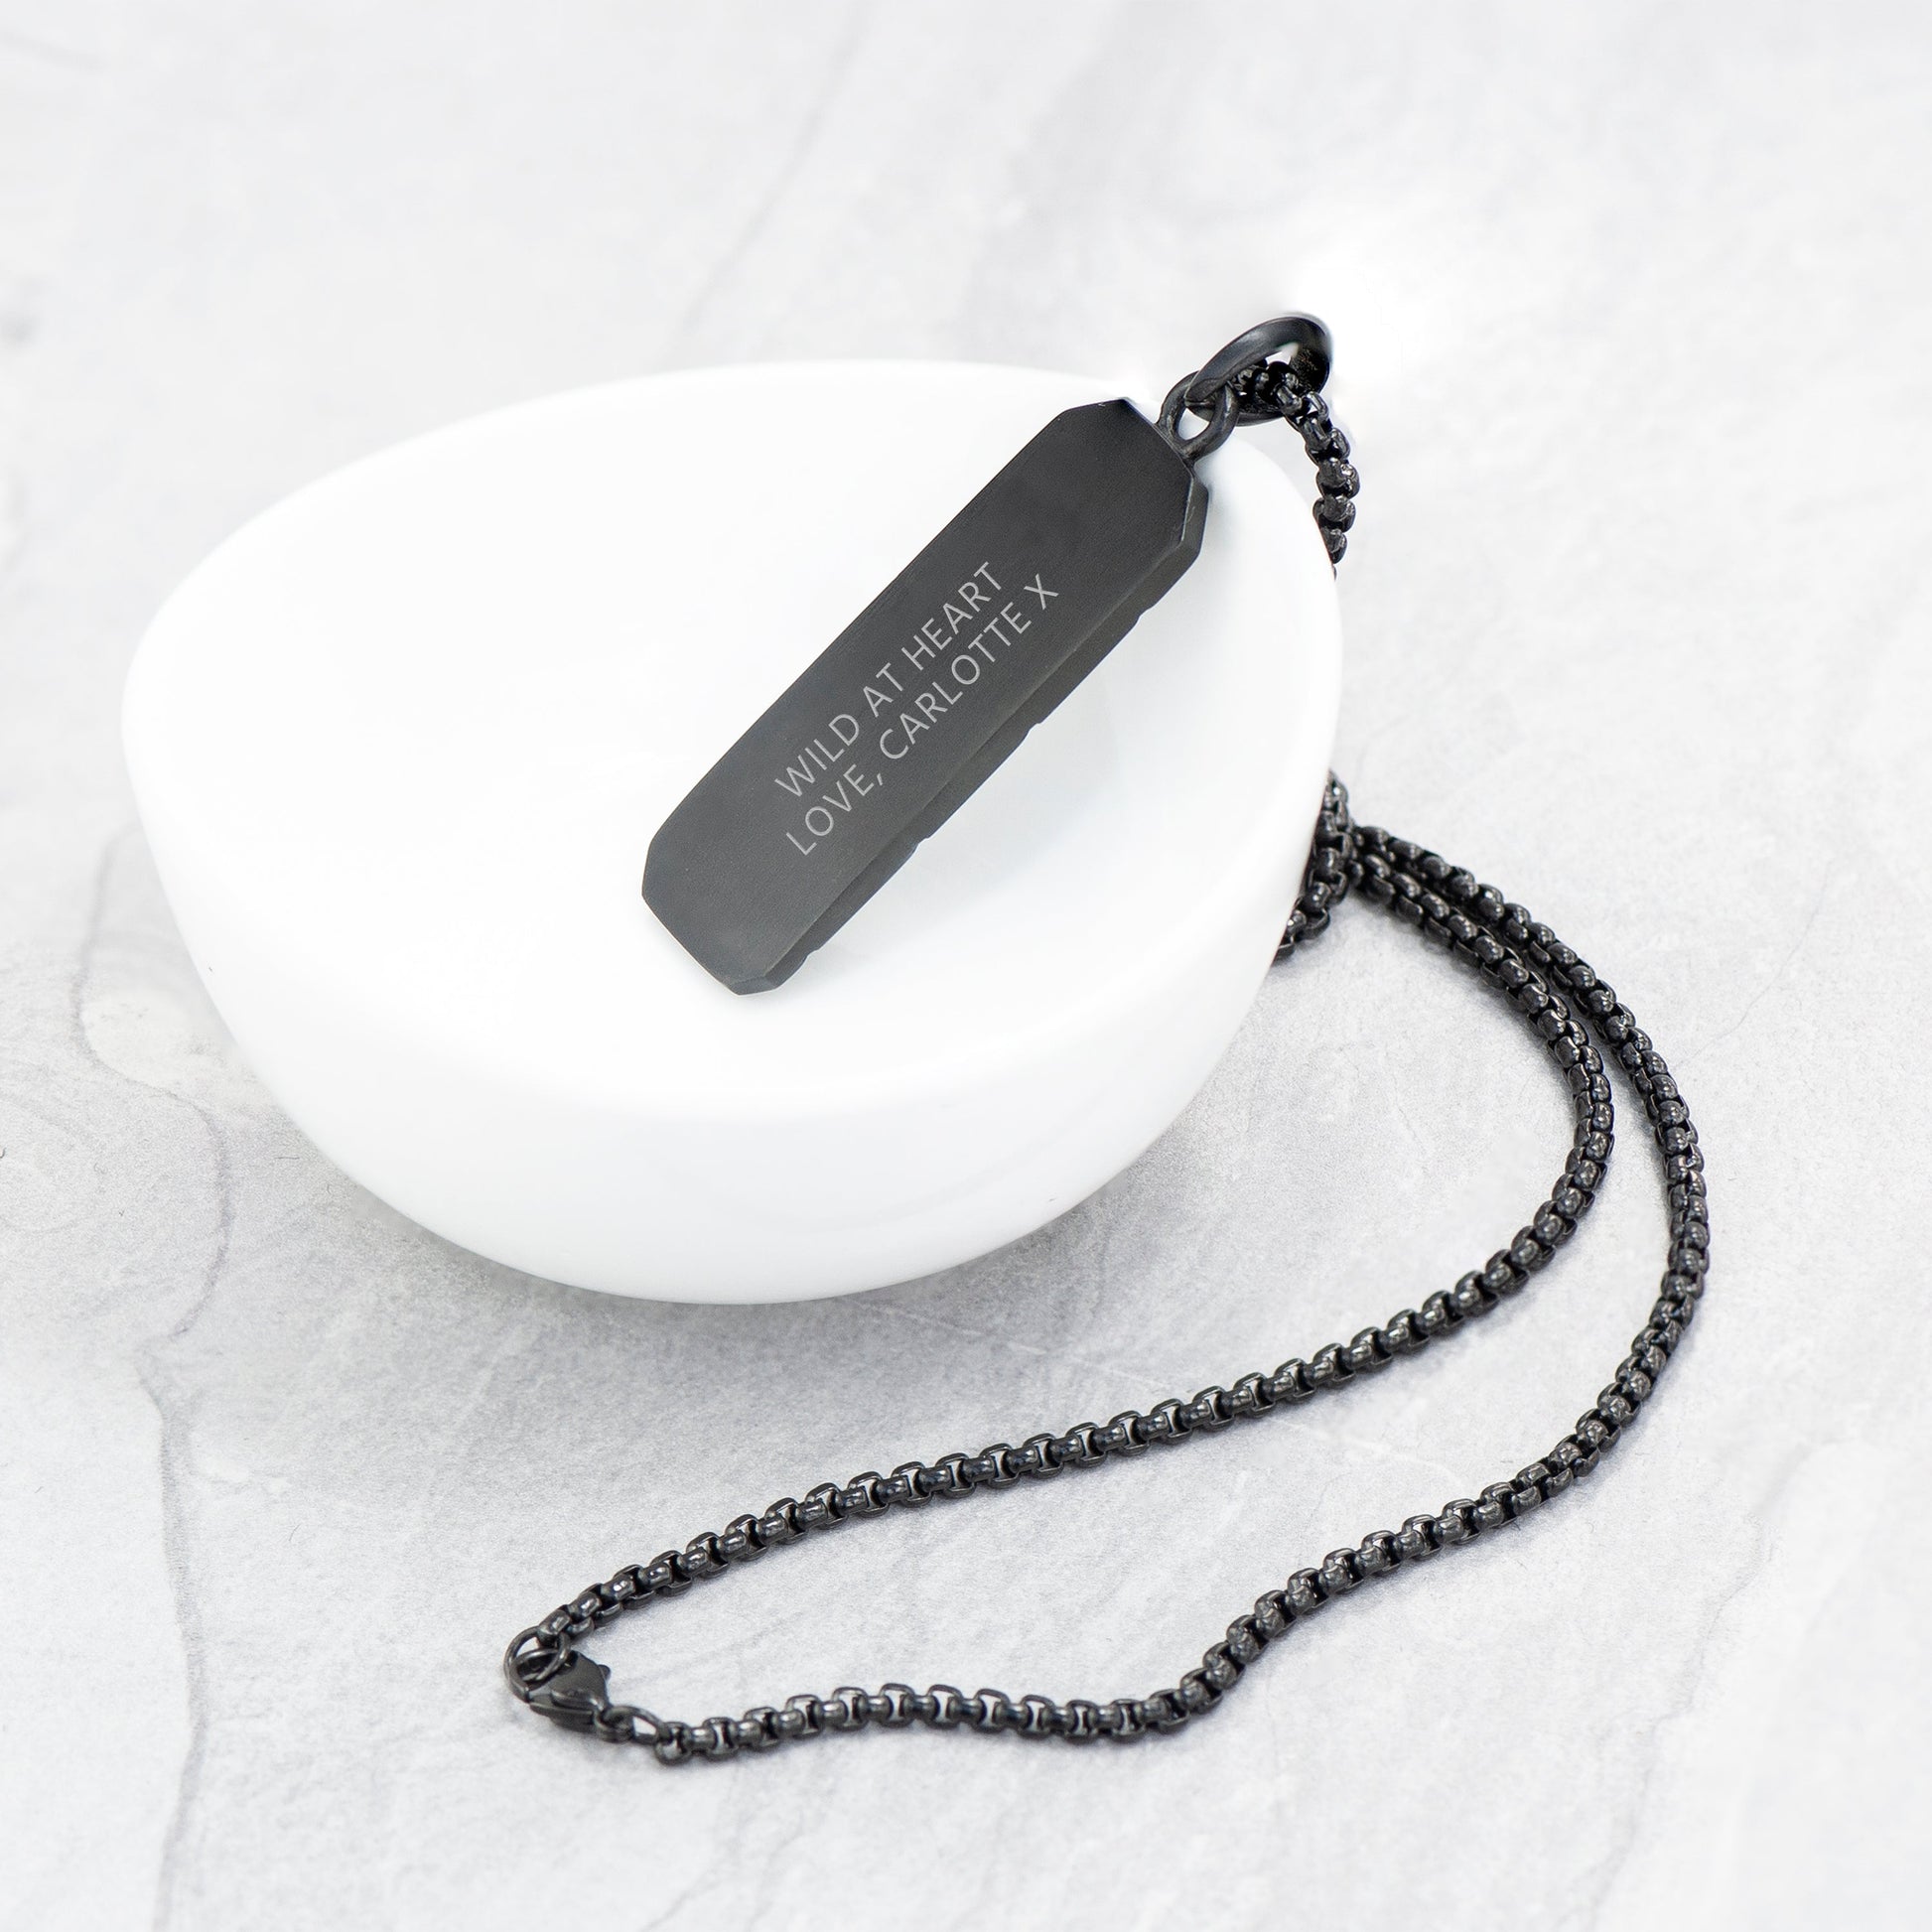 Personalized men's necklaces - Personalized Men's Tyretread Stone Necklace 